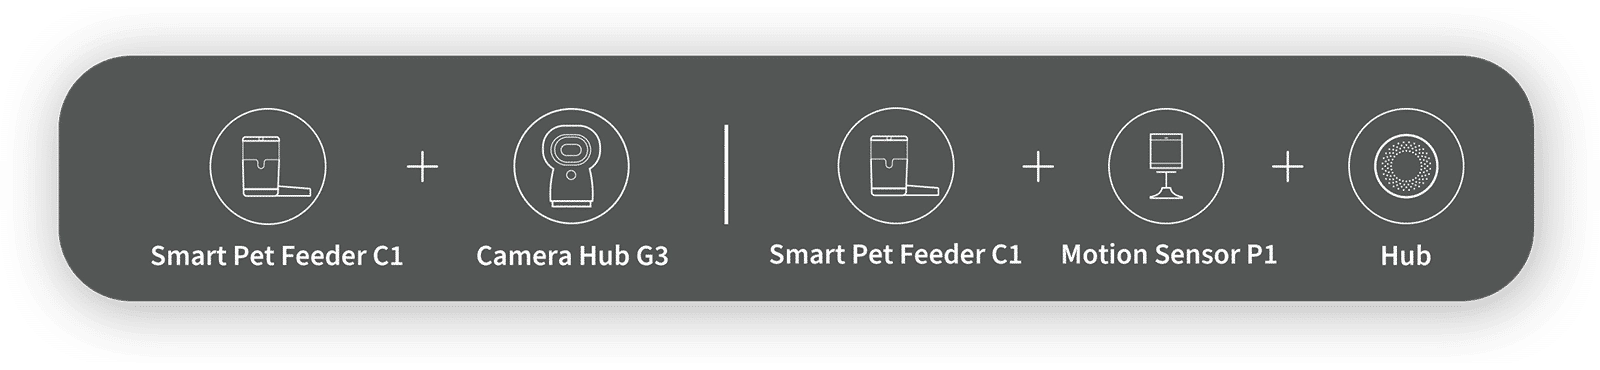 Use the Camera Hub G3 or Motion Sensor to check when your pet is eating or if it hasn't eaten the food